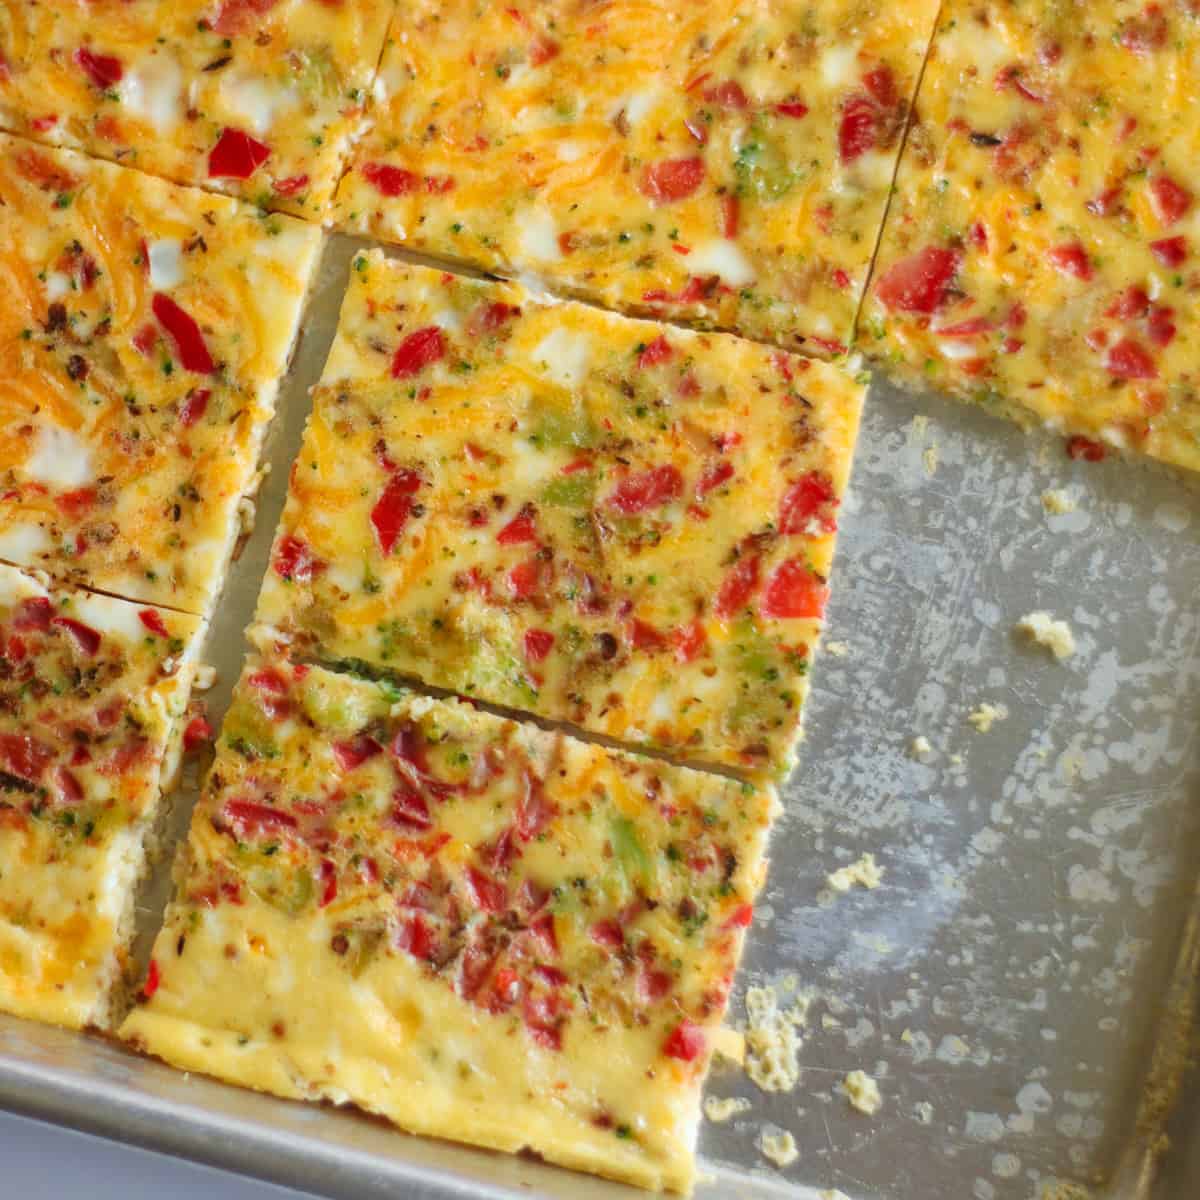 The Perfect Sheet Pan Eggs - MJ and Hungryman